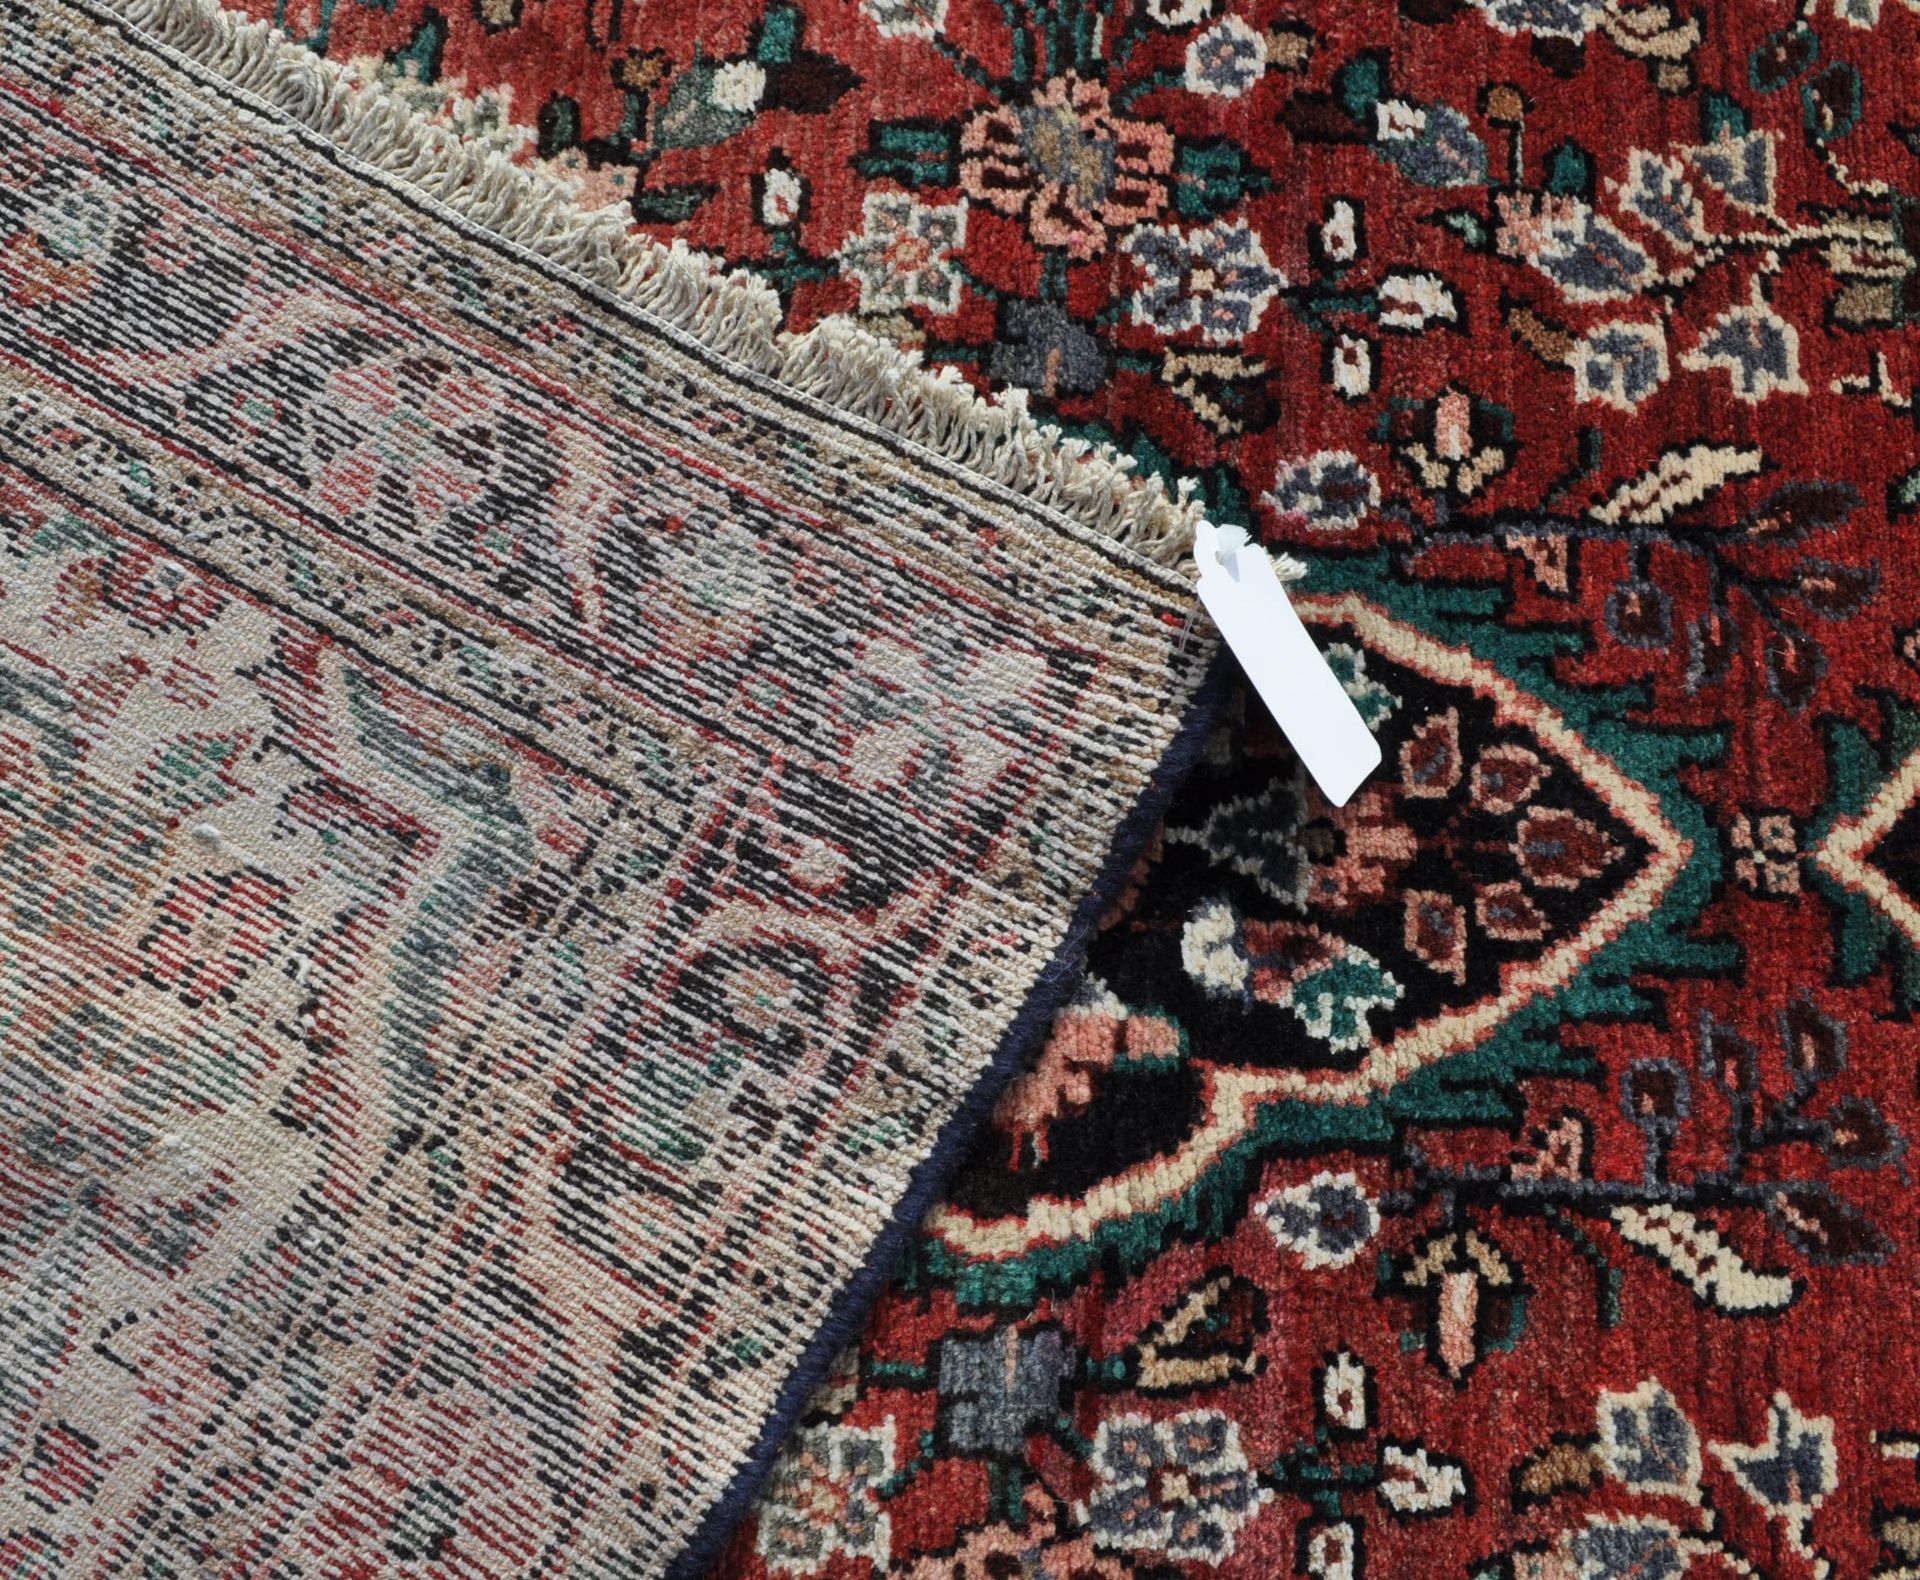 20TH CENTURY NORTH WEST PERSIAN BORCHALUE RUG - Image 3 of 3